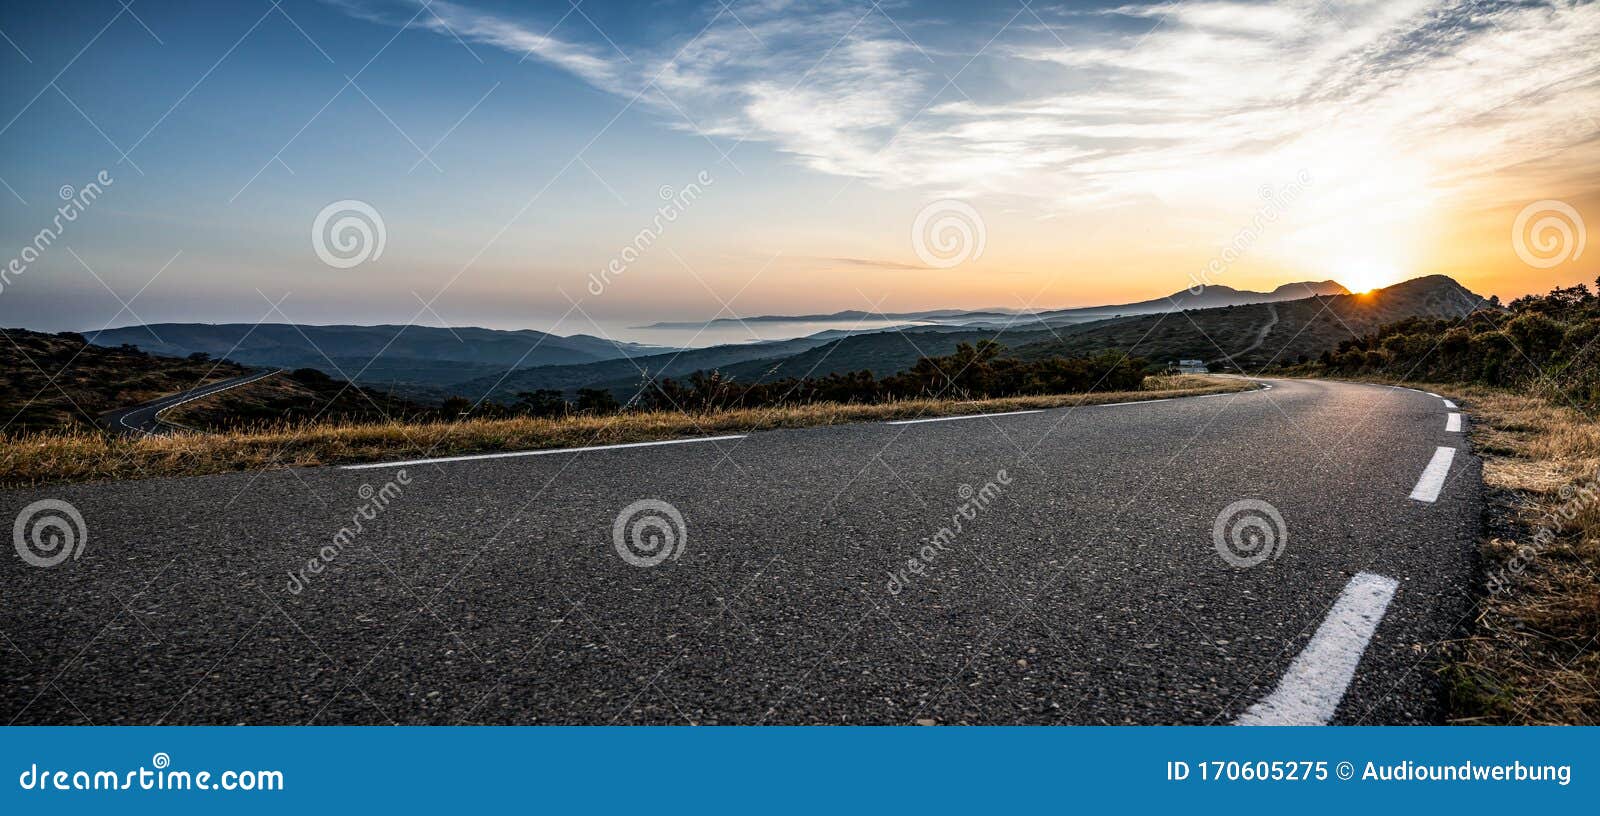 empty long mountain road to the horizon on a sunny summer day at bright sunset